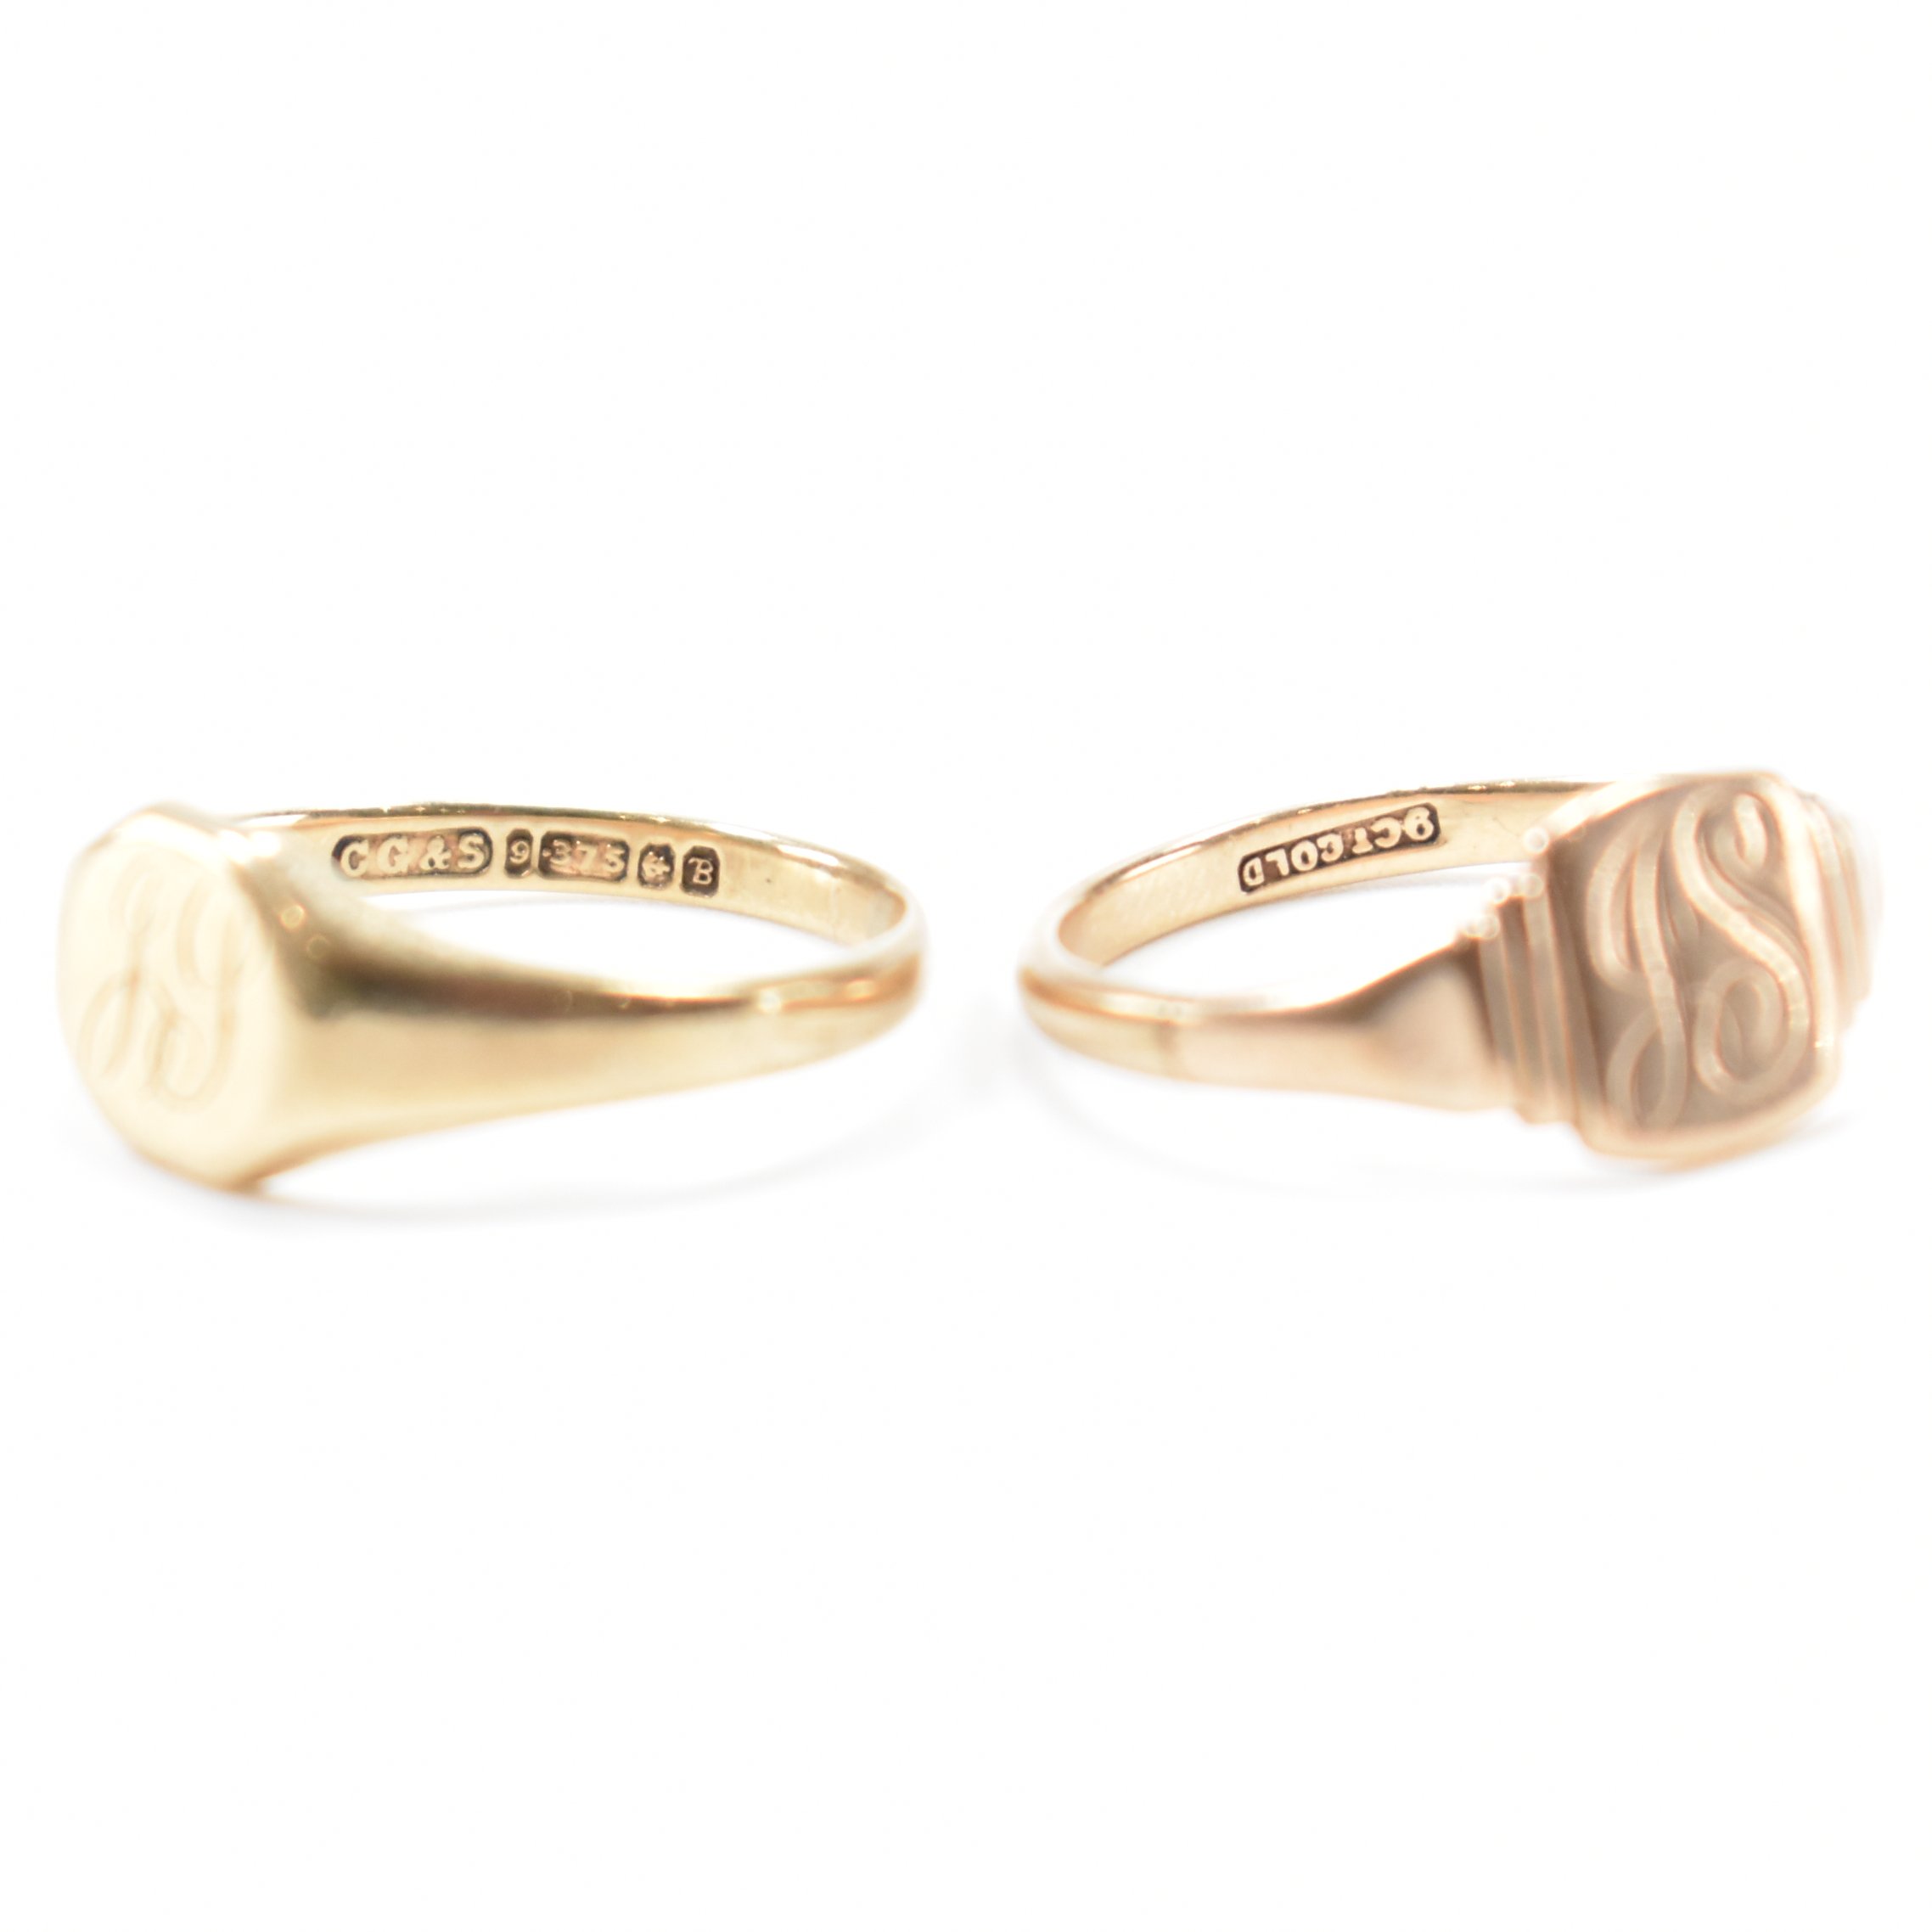 TWO 9CT GOLD SIGNET RINGS - Image 5 of 7